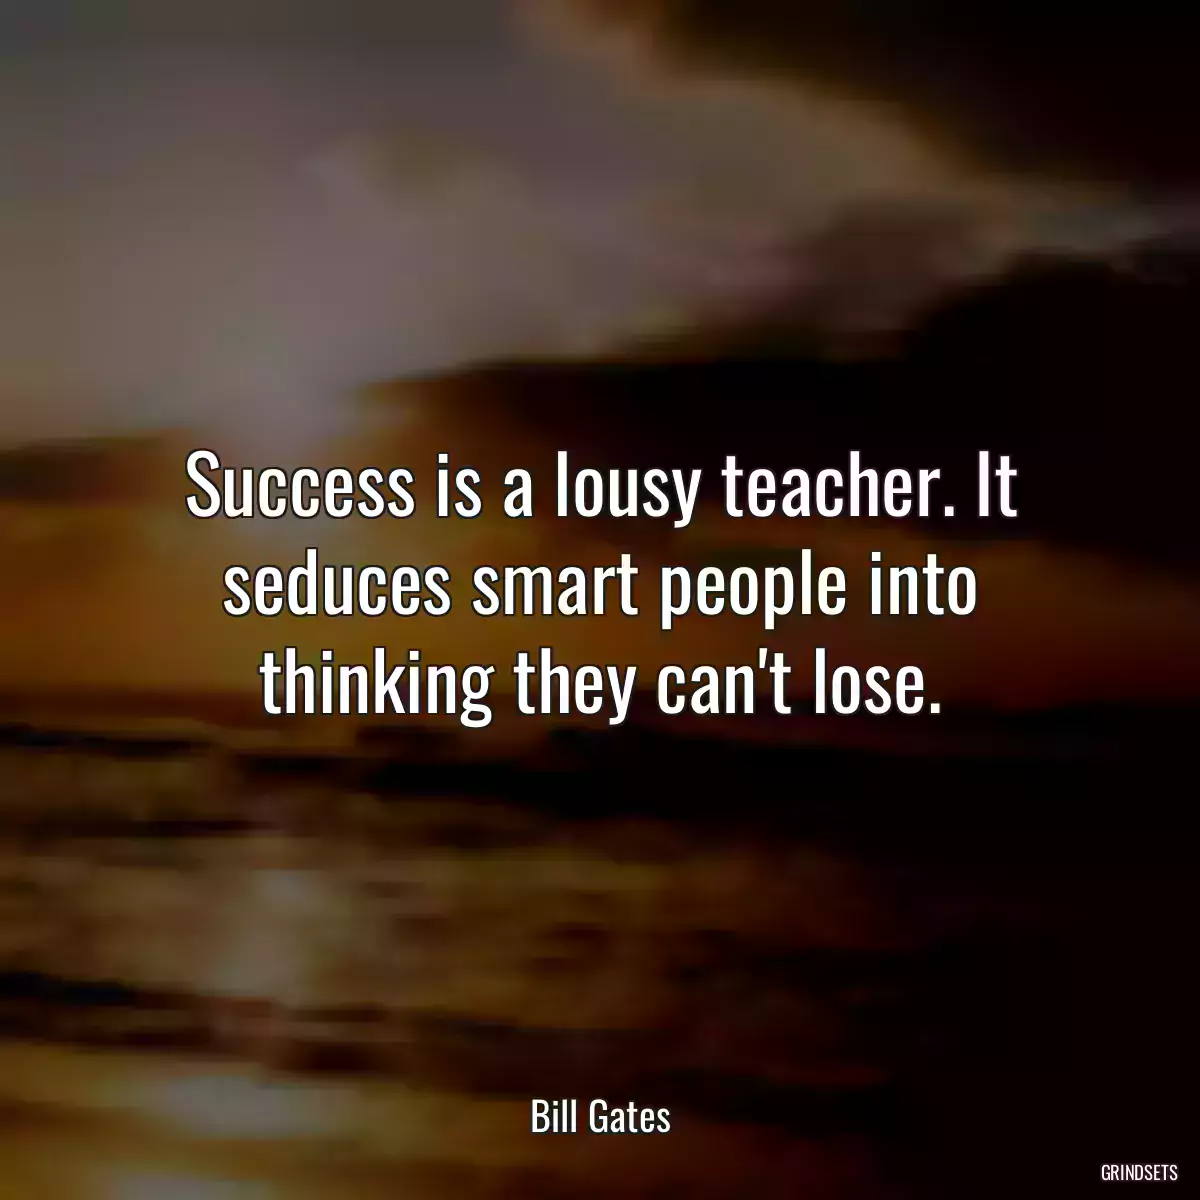 Success is a lousy teacher. It seduces smart people into thinking they can\'t lose.